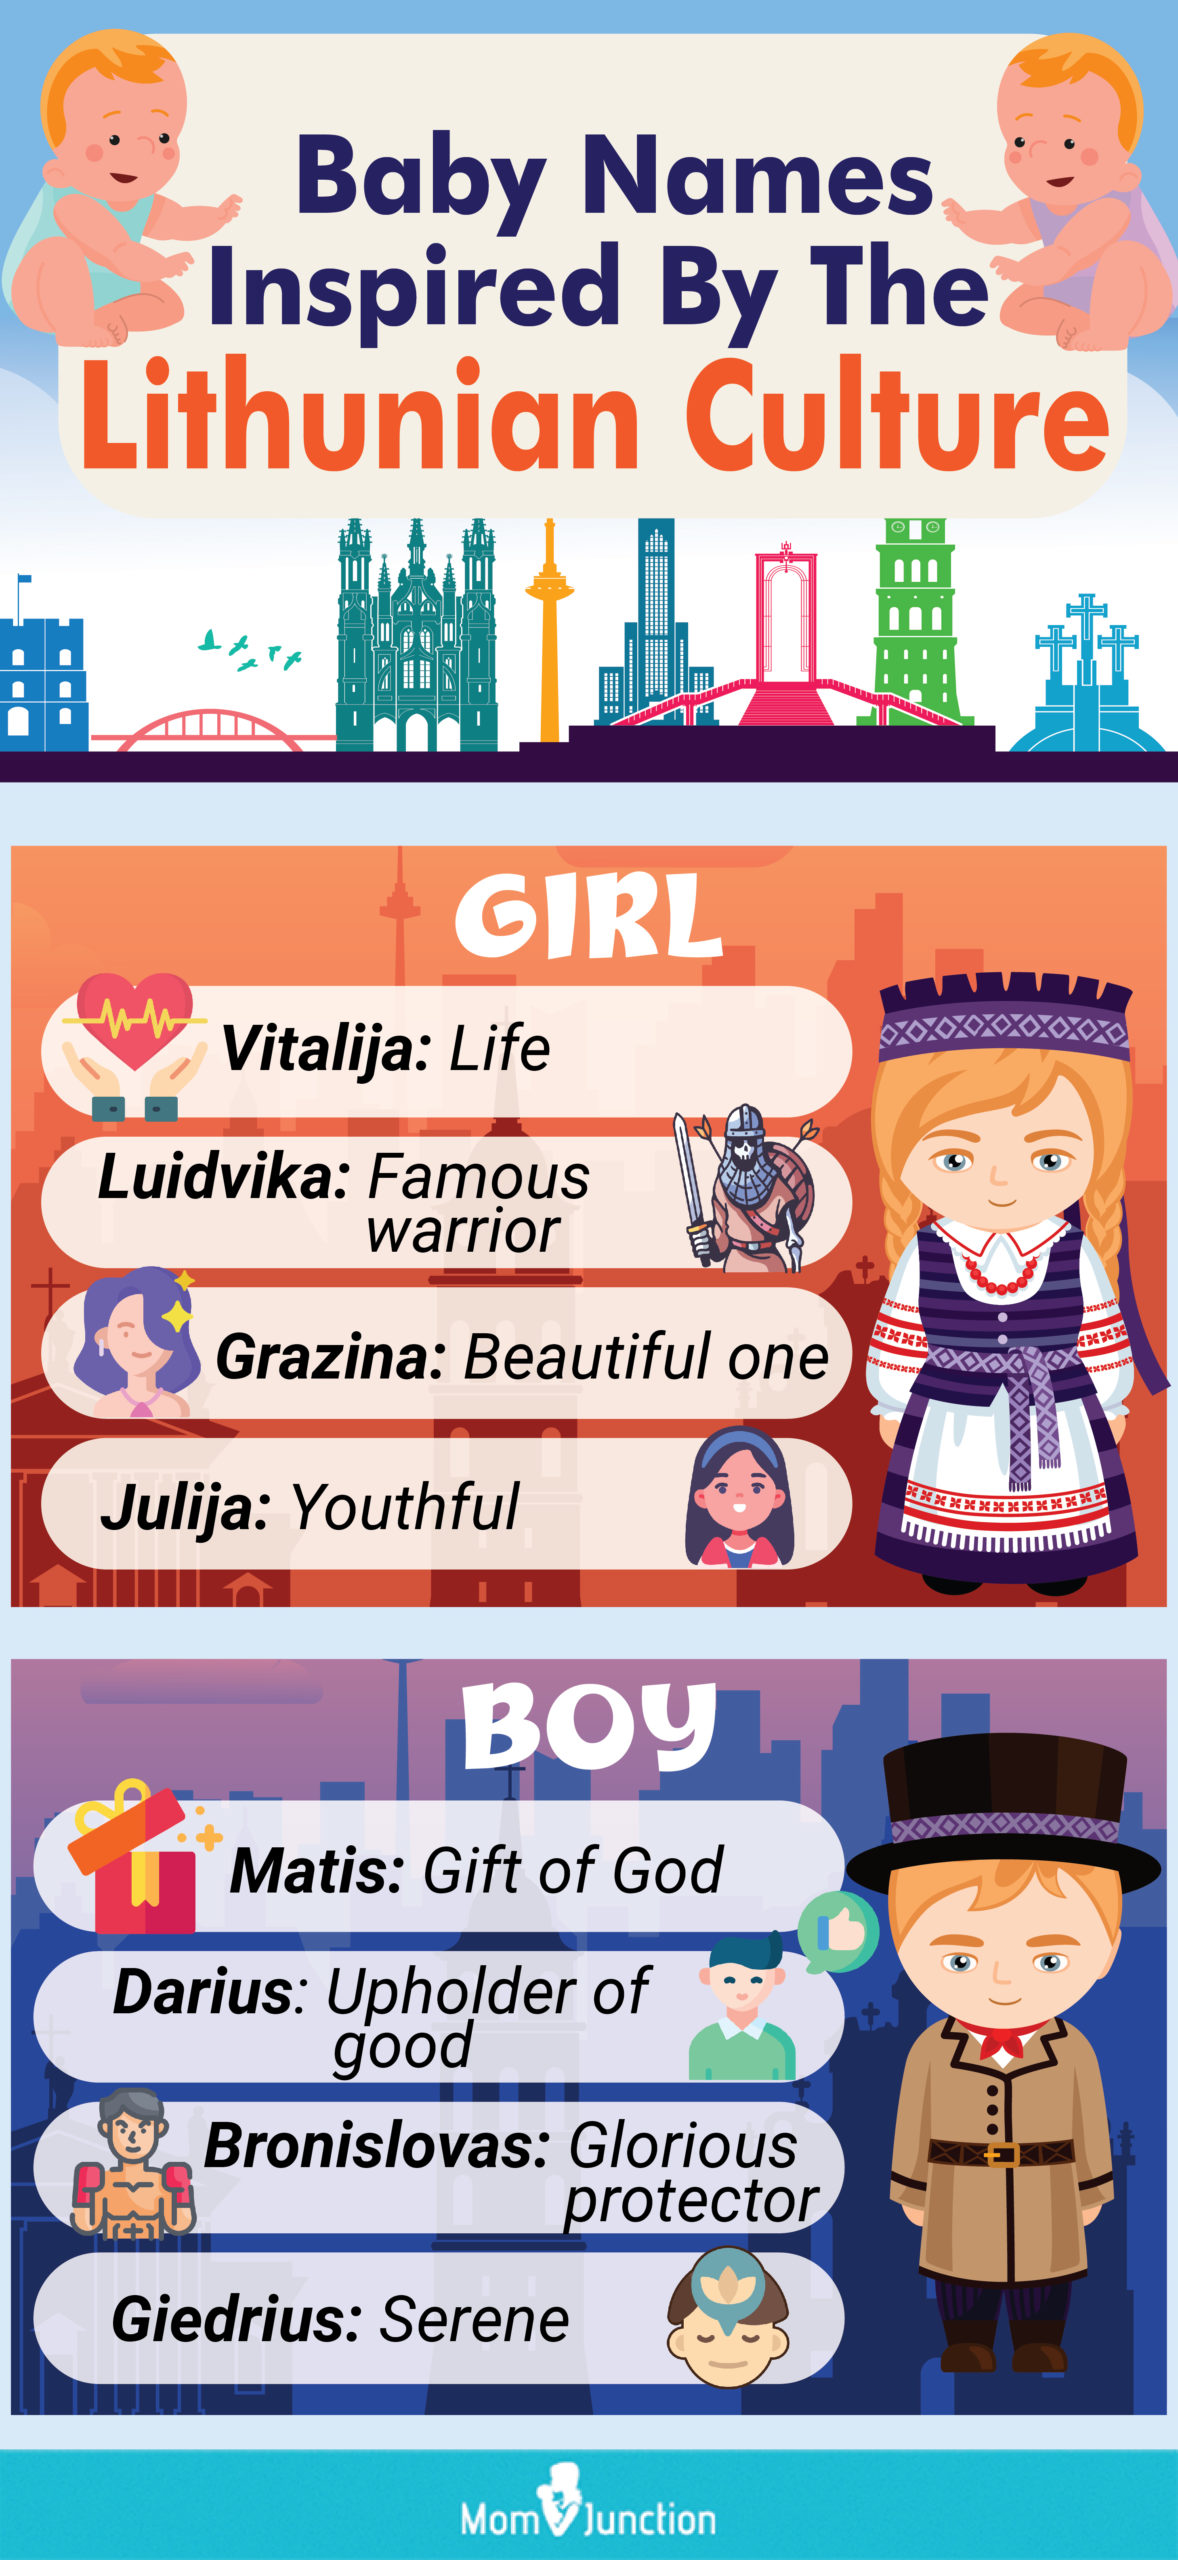 baby names inspired by the lithunian culture (infographic)